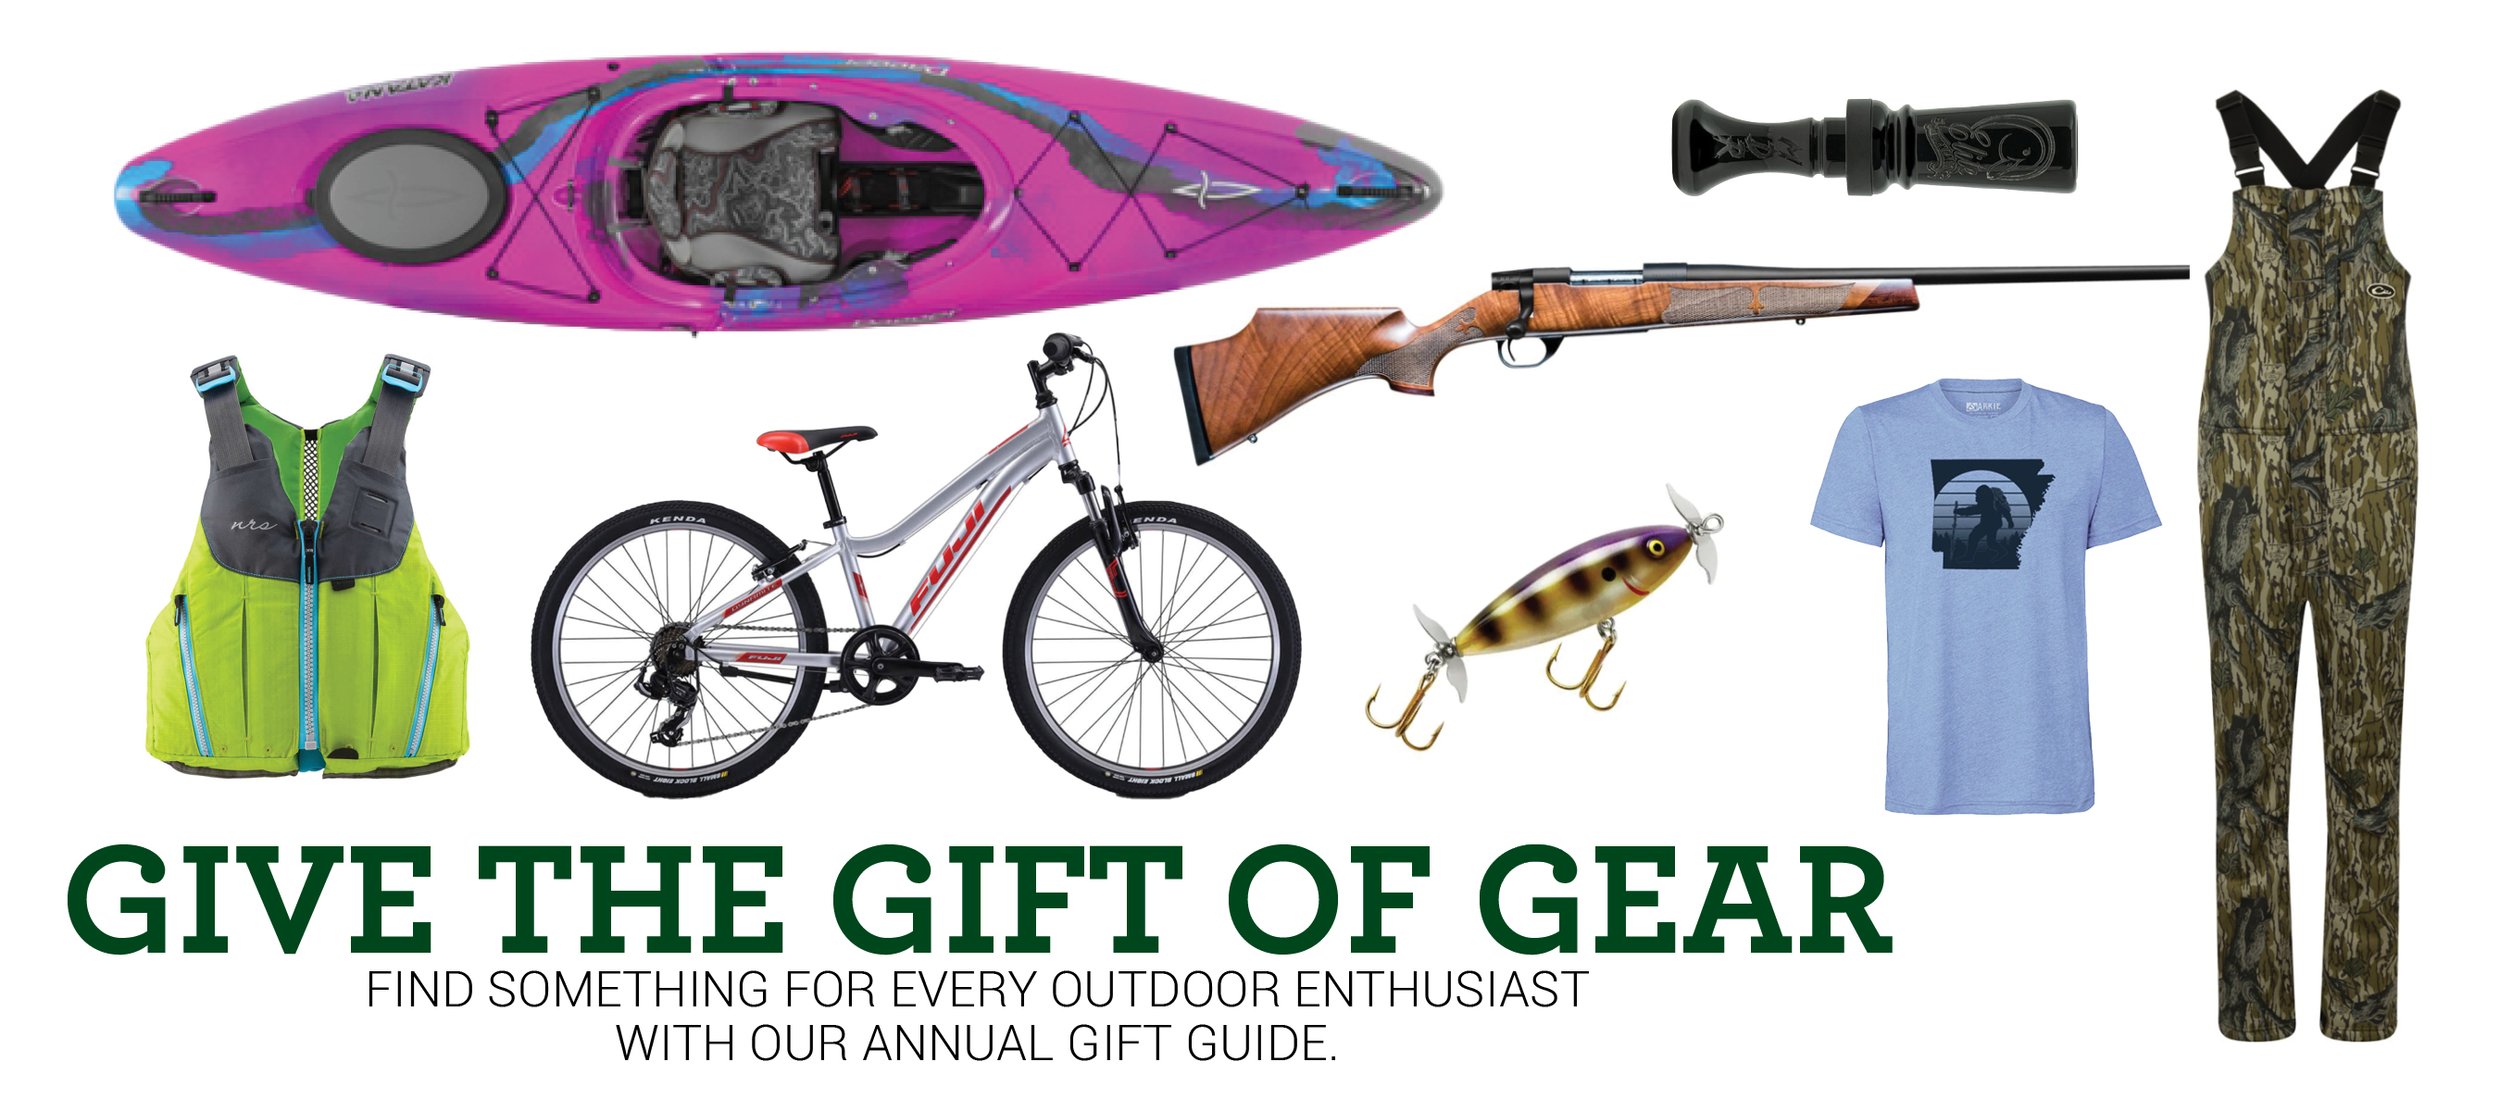 Give the Gift of Gear.jpg